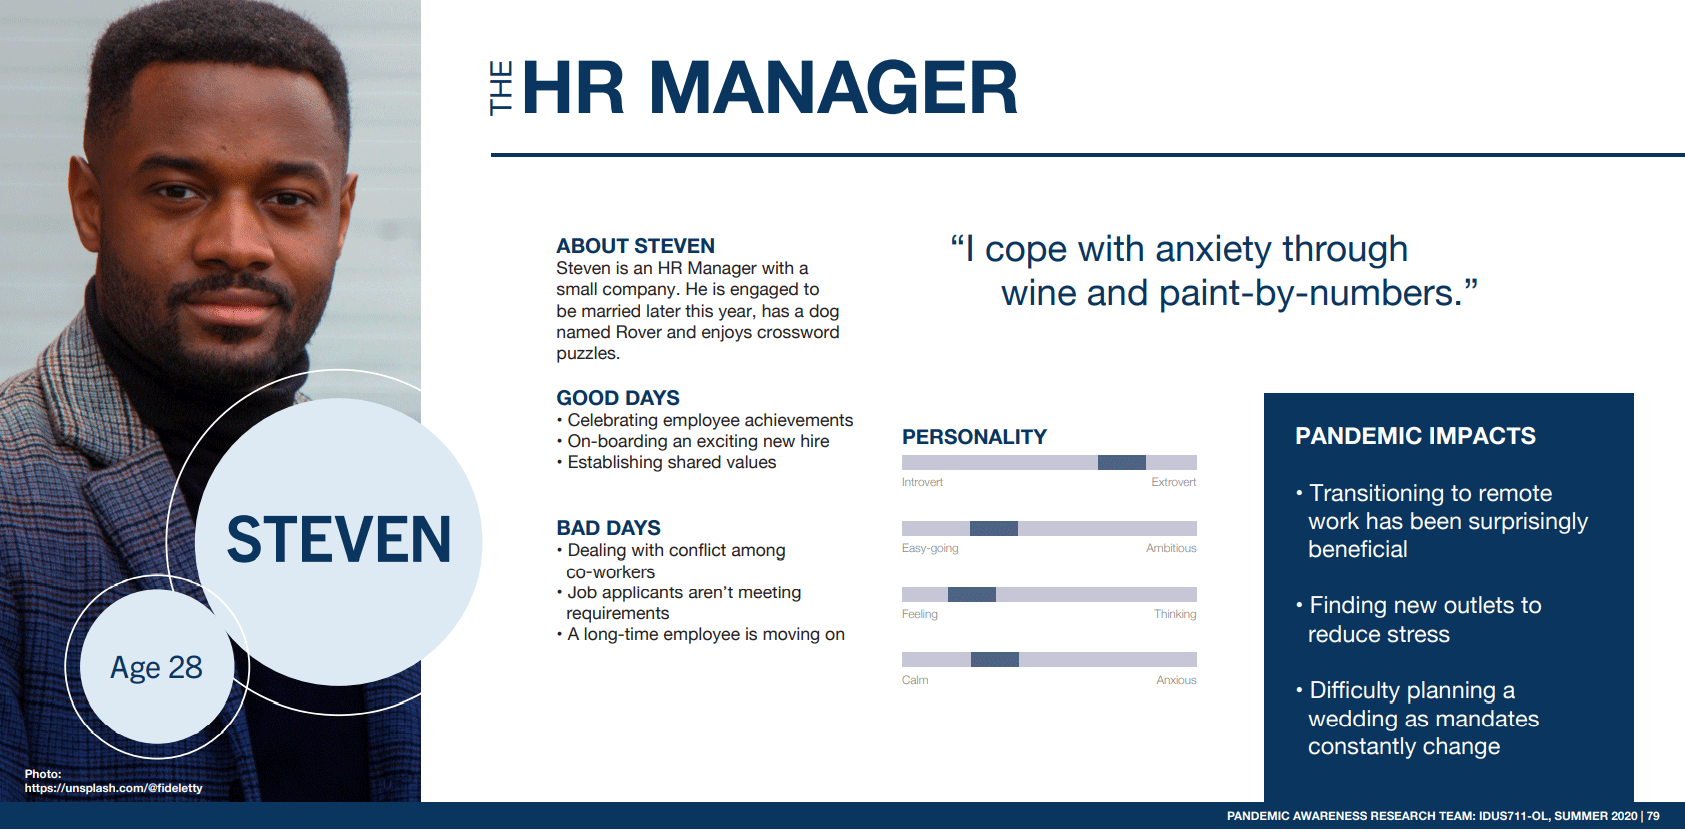 The HR Manager